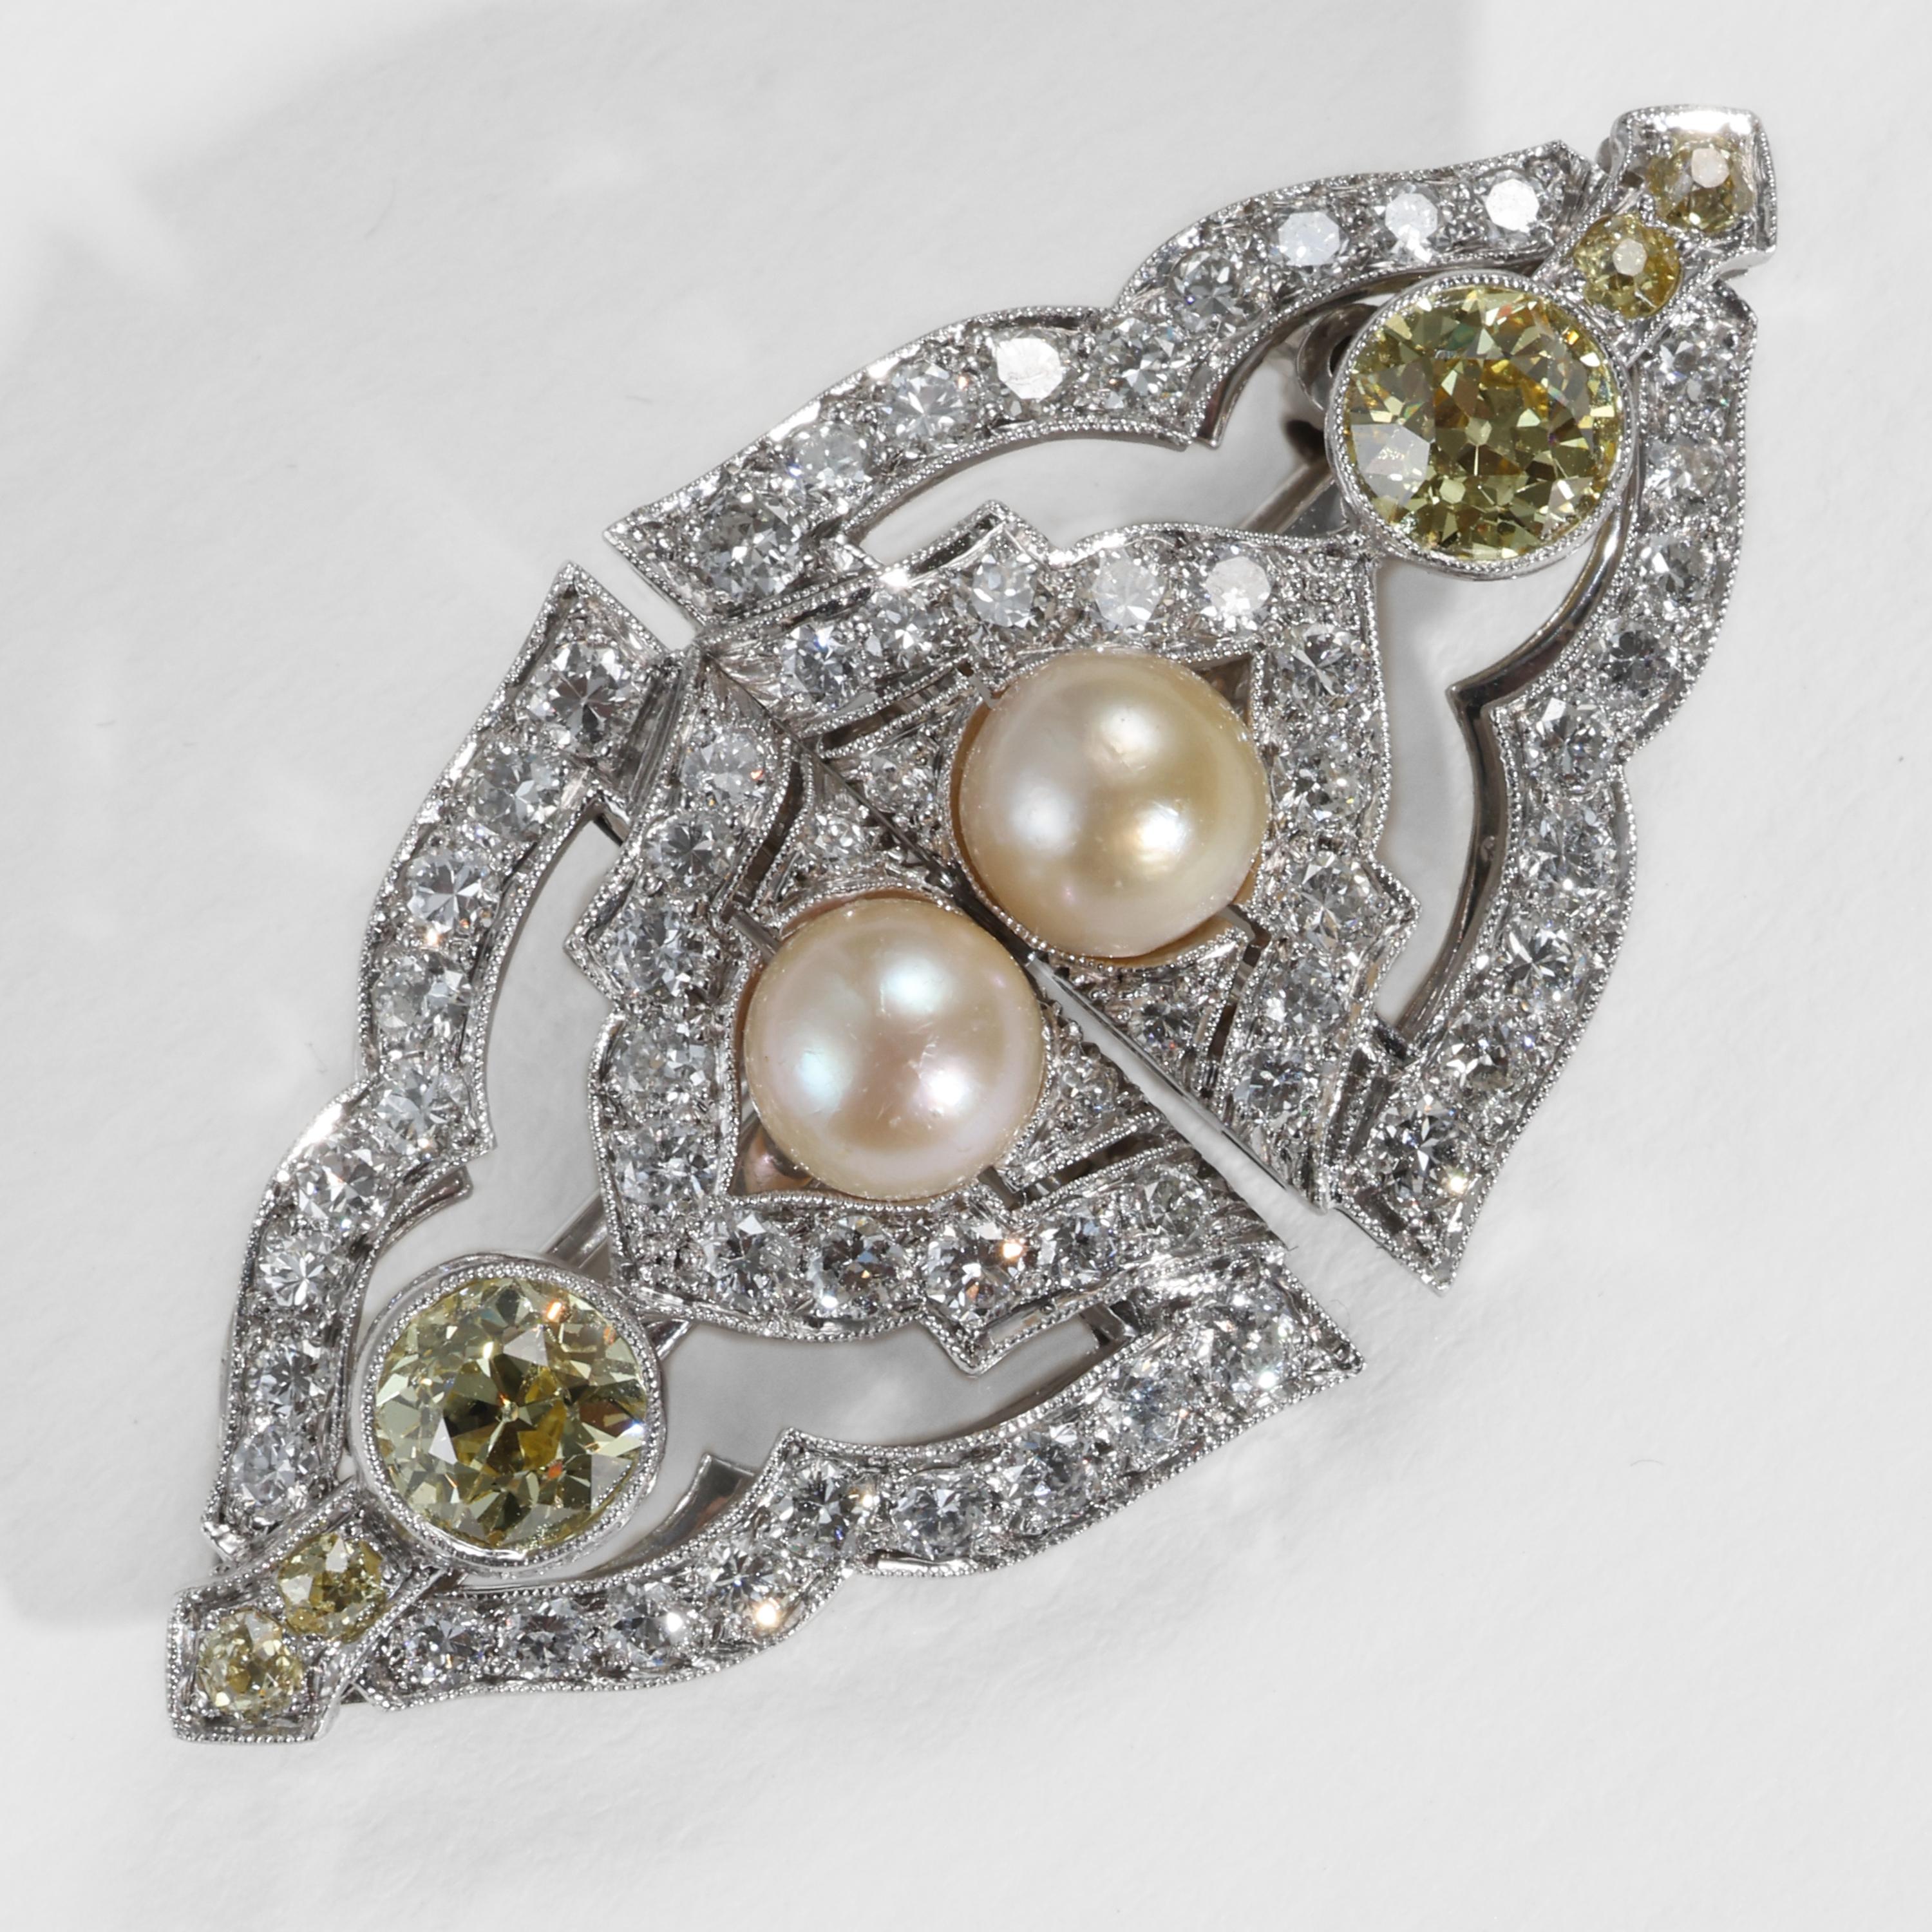 This glorious Art Deco masterpiece is not only significantly gorgeous -it's delightfully versatile. Wear it around your neck as the focal-point of a dog collar or ribbon, pin it to a lapel, scarf, or top and it's a brooch. But lift the corners and